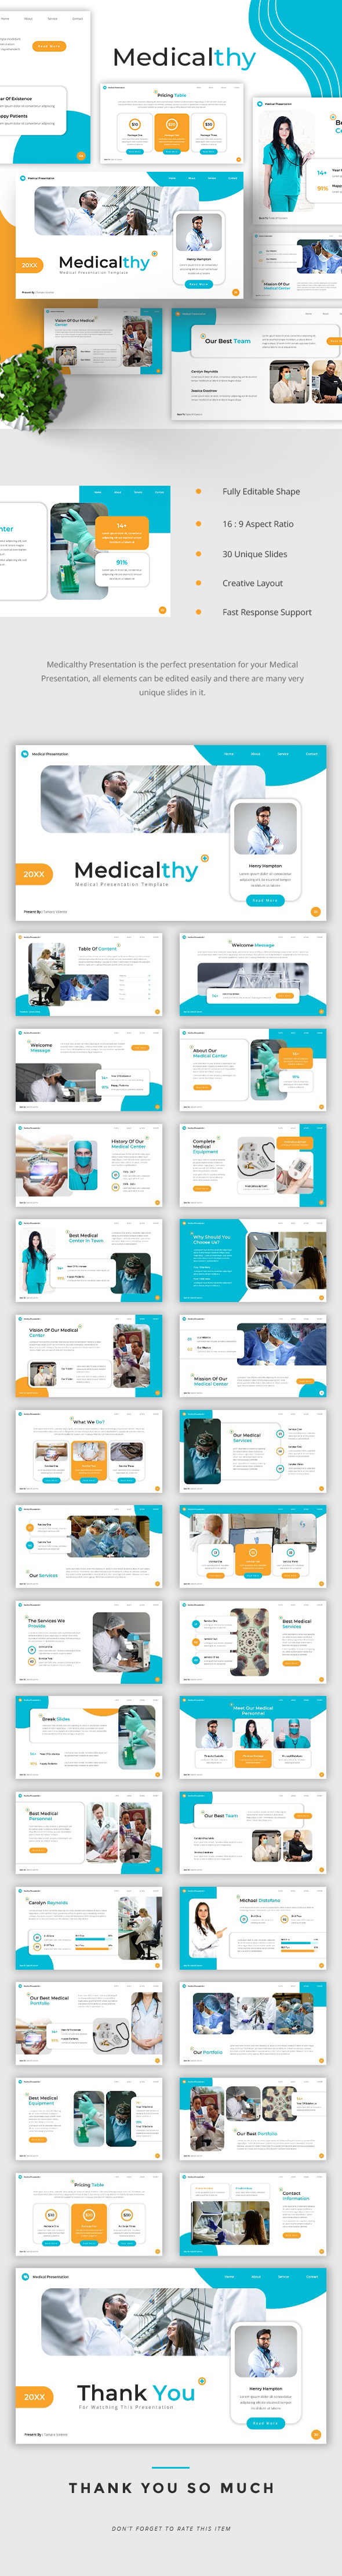 [DOWNLOAD]Medicalthy - Medical PowerPoint